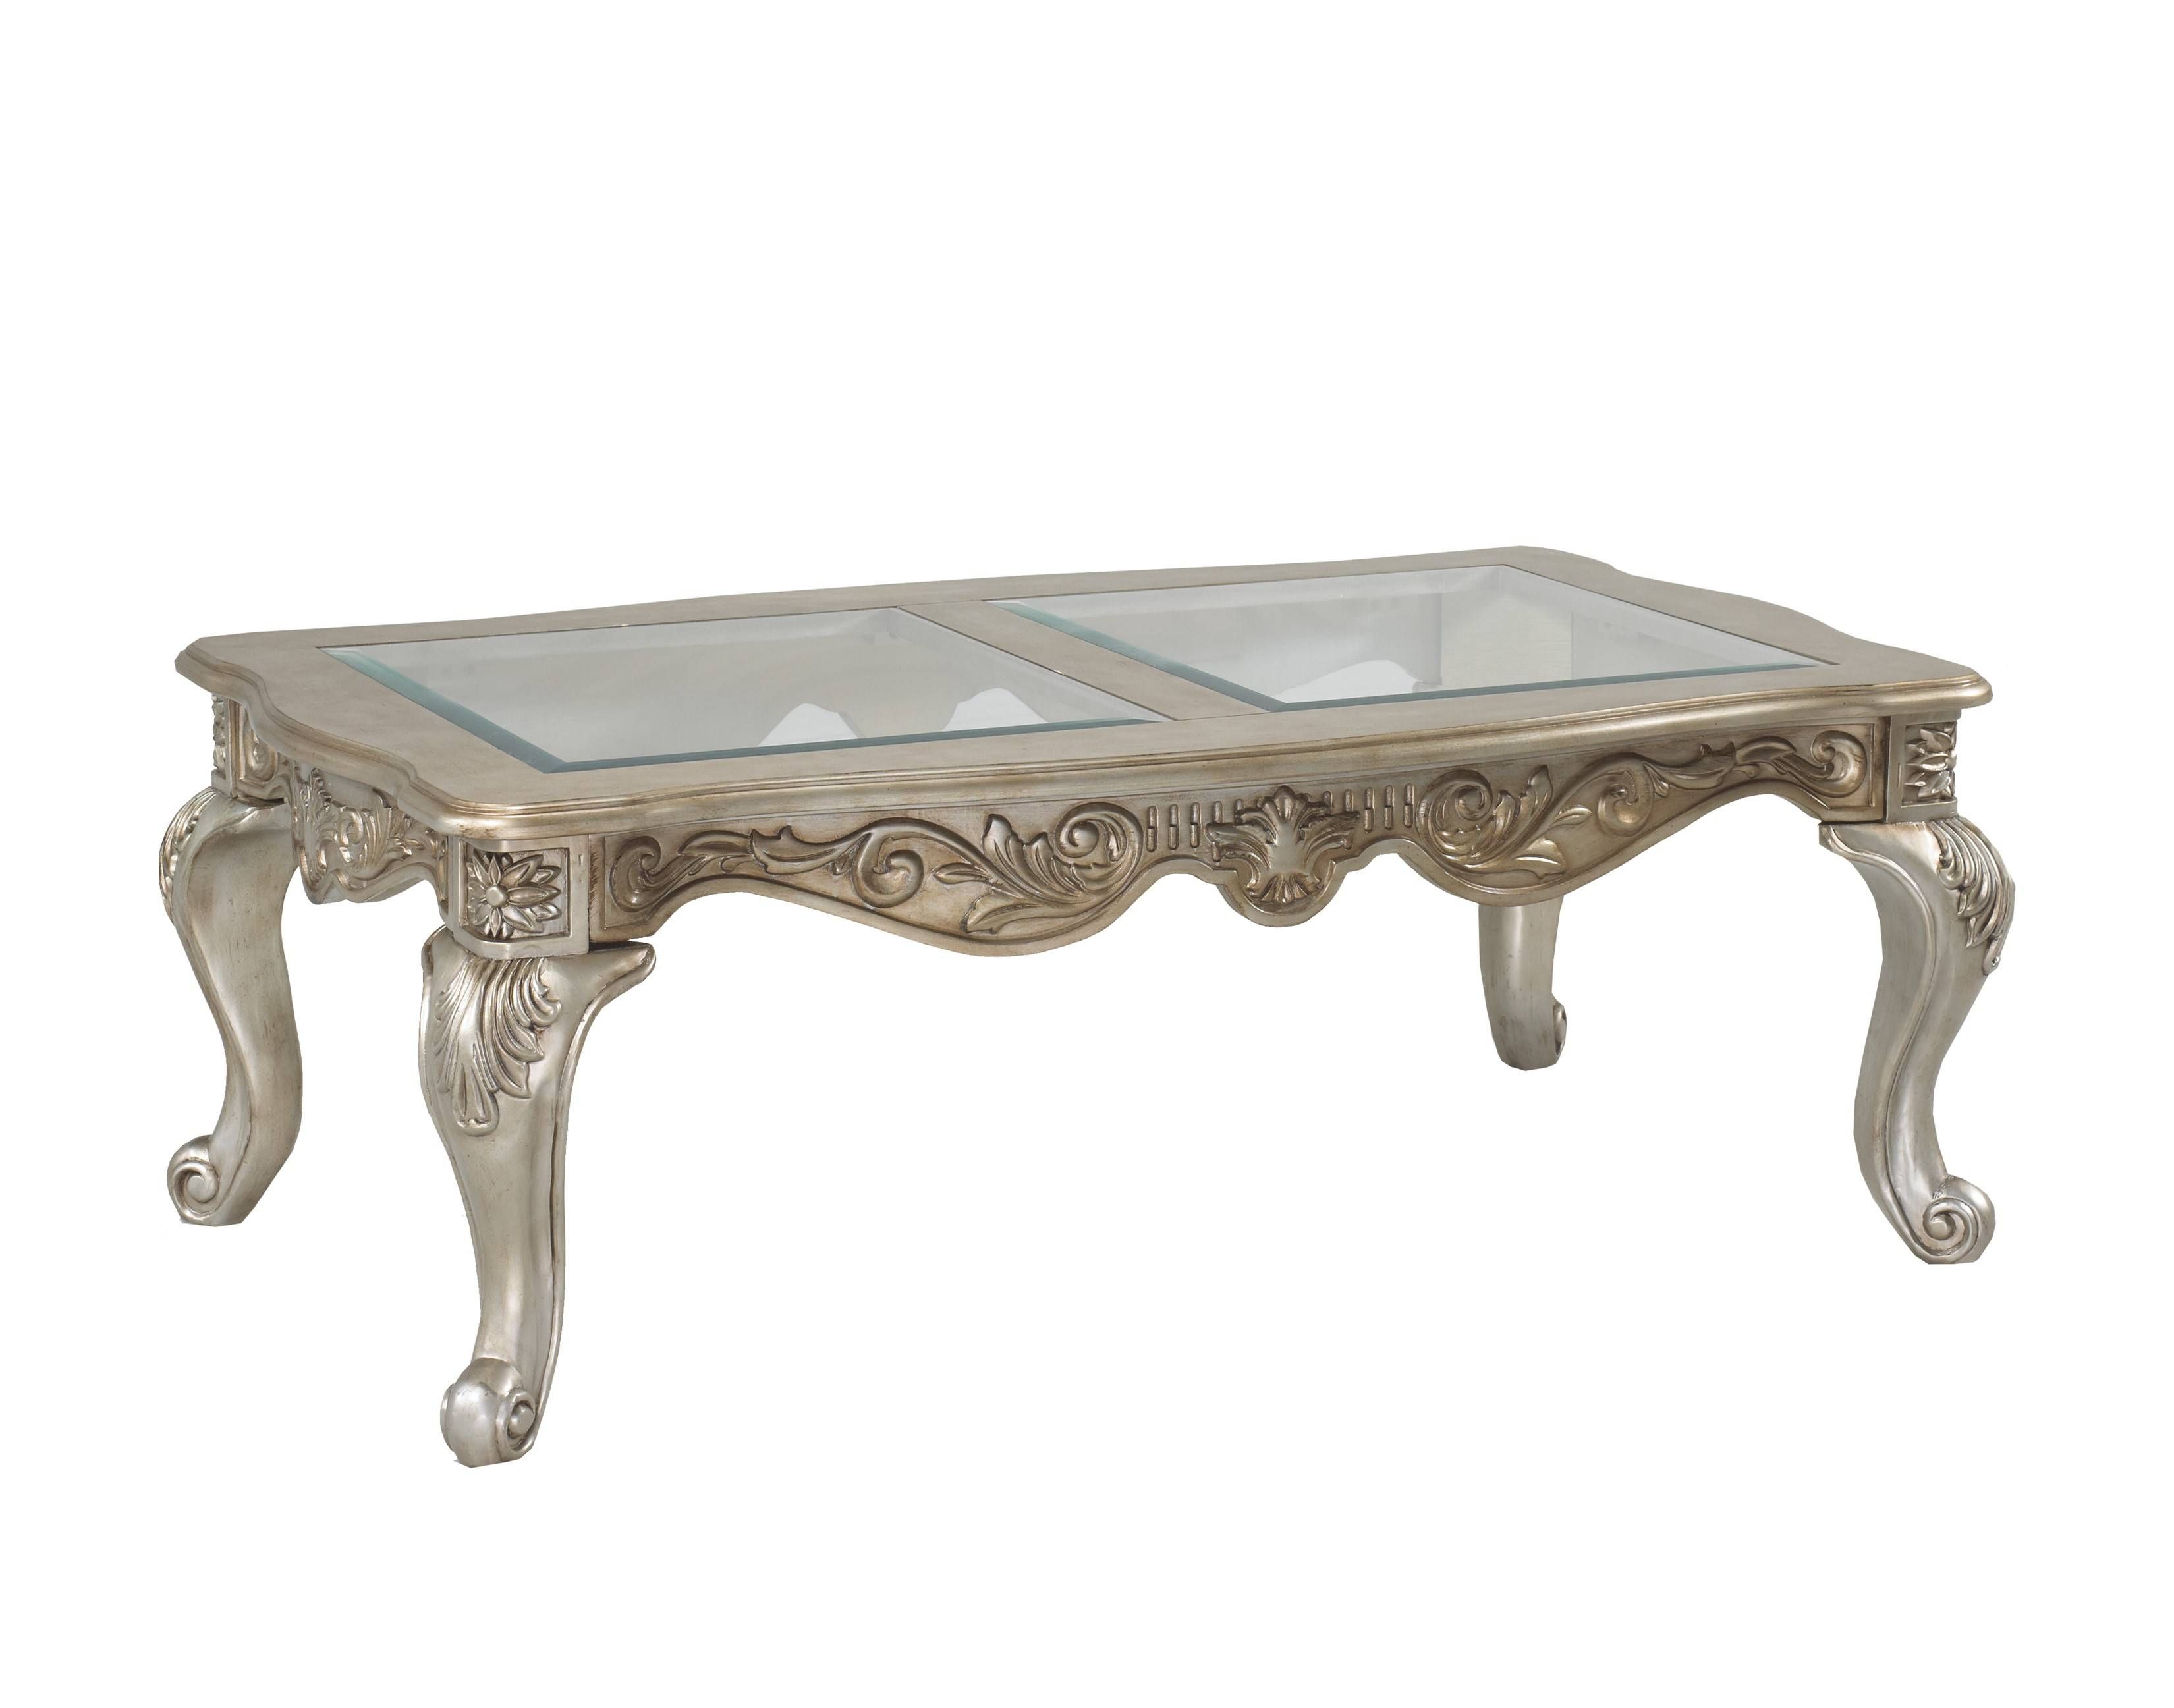 Vintage Metal And Glass Coffee Table | Coffee Tables Decoration In Antique Glass Coffee Tables (View 1 of 30)